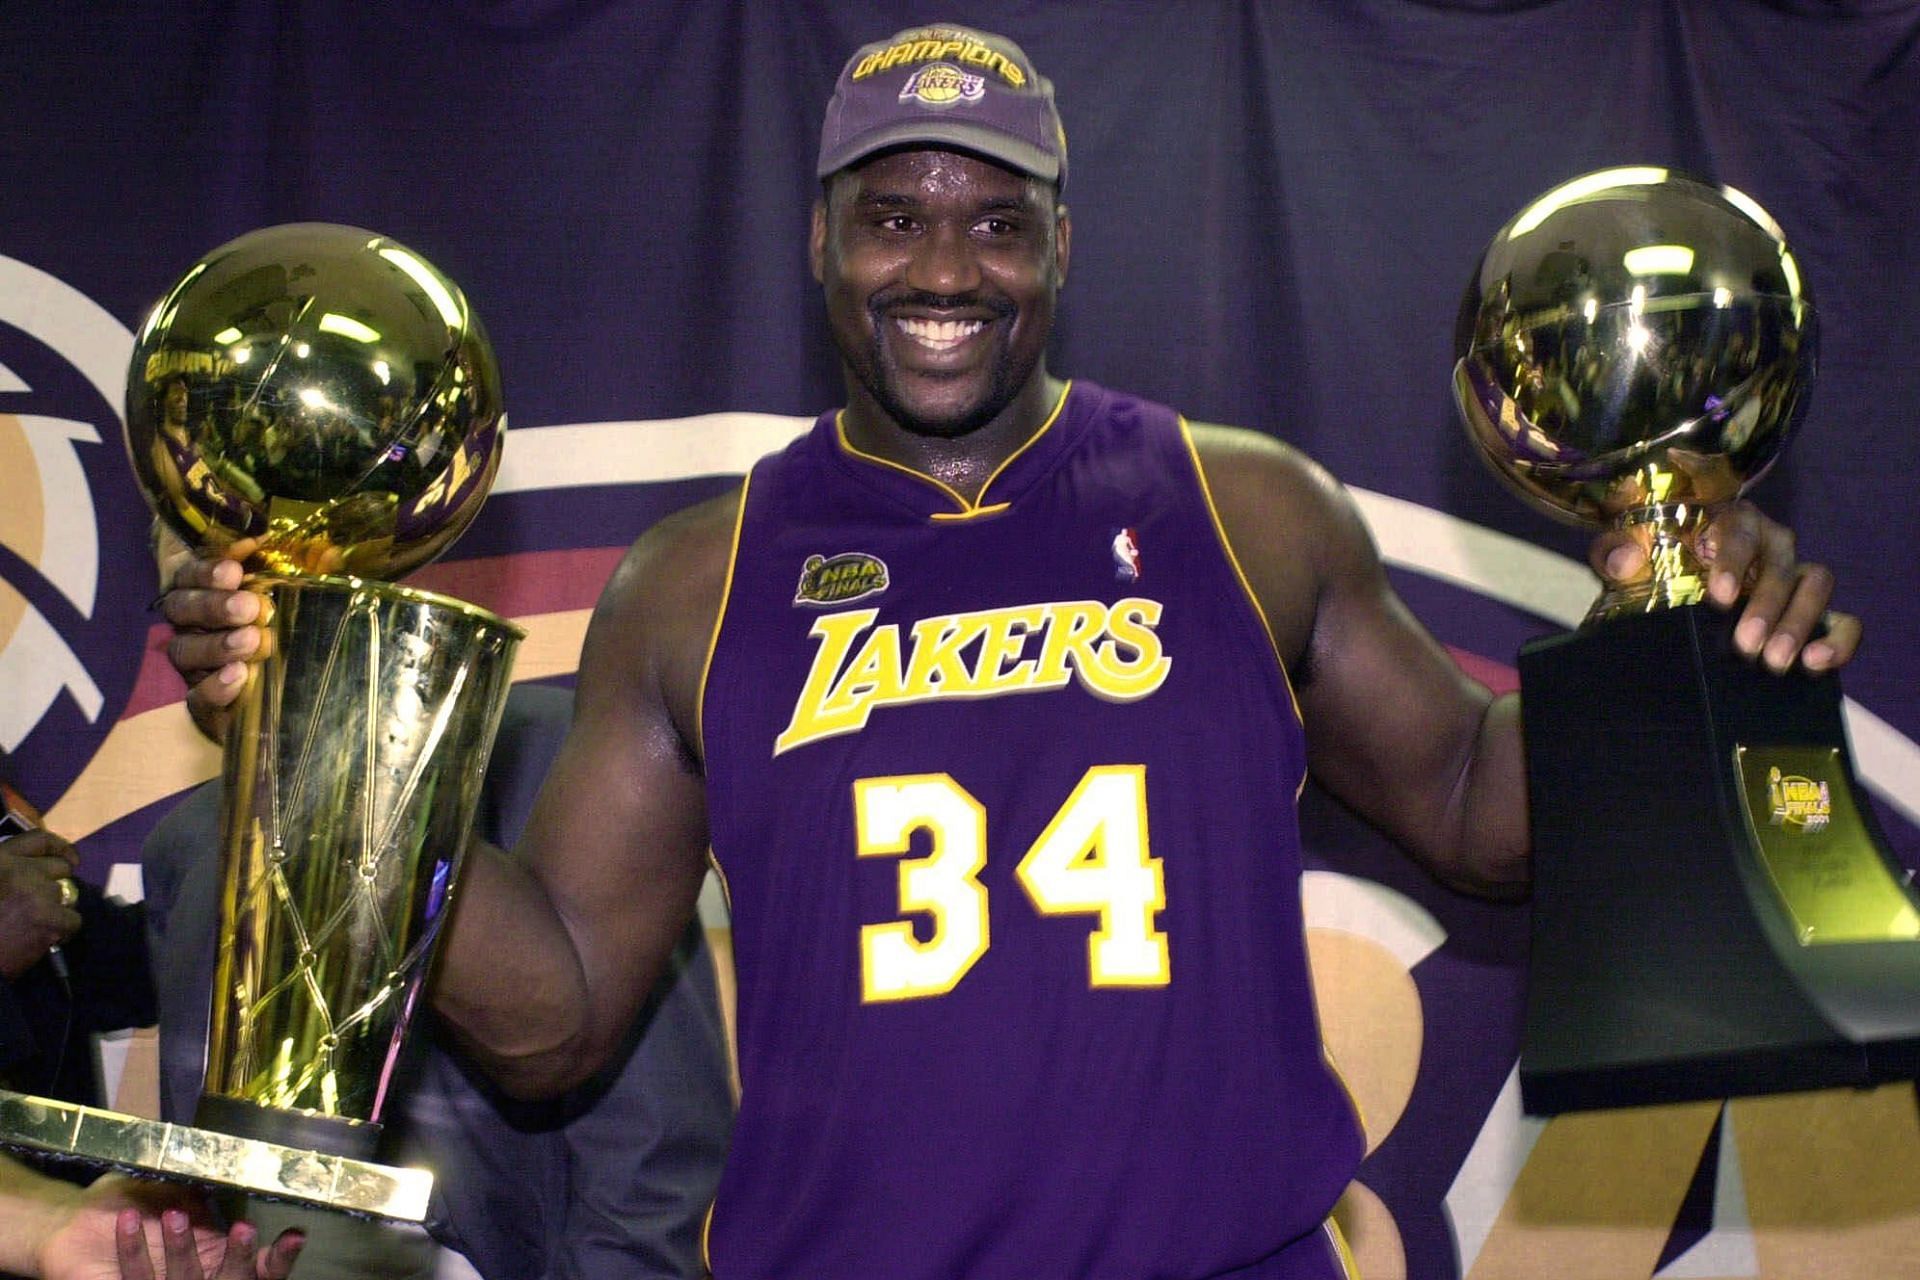 Listing Shaquille O'Neal's Top 3 finishes in NBA MVP voting